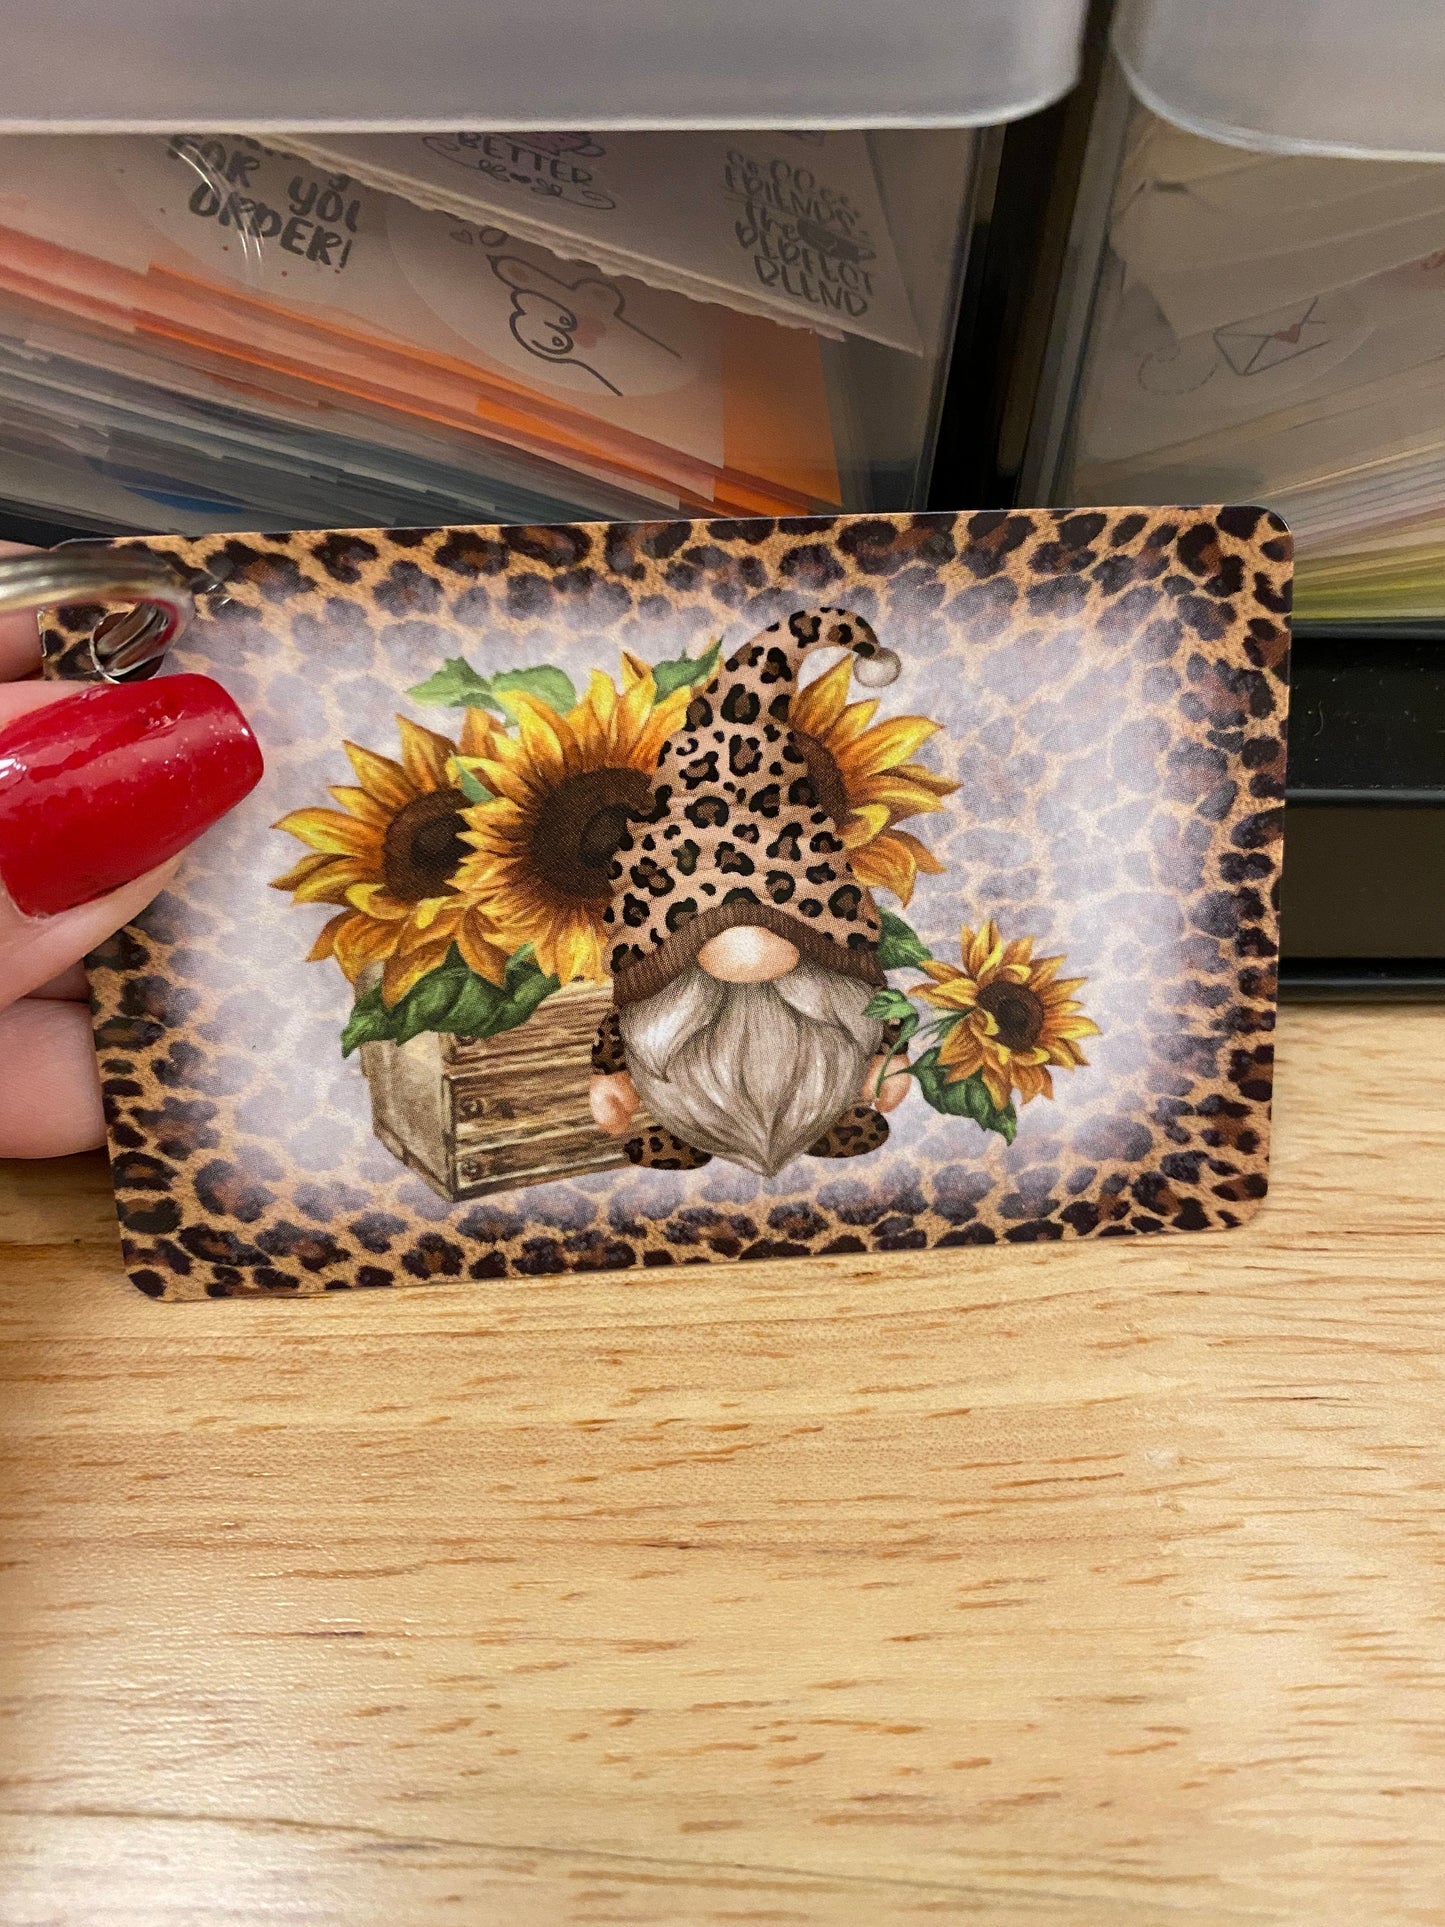 Gnome and Sunflowers Key Chain Double Sided